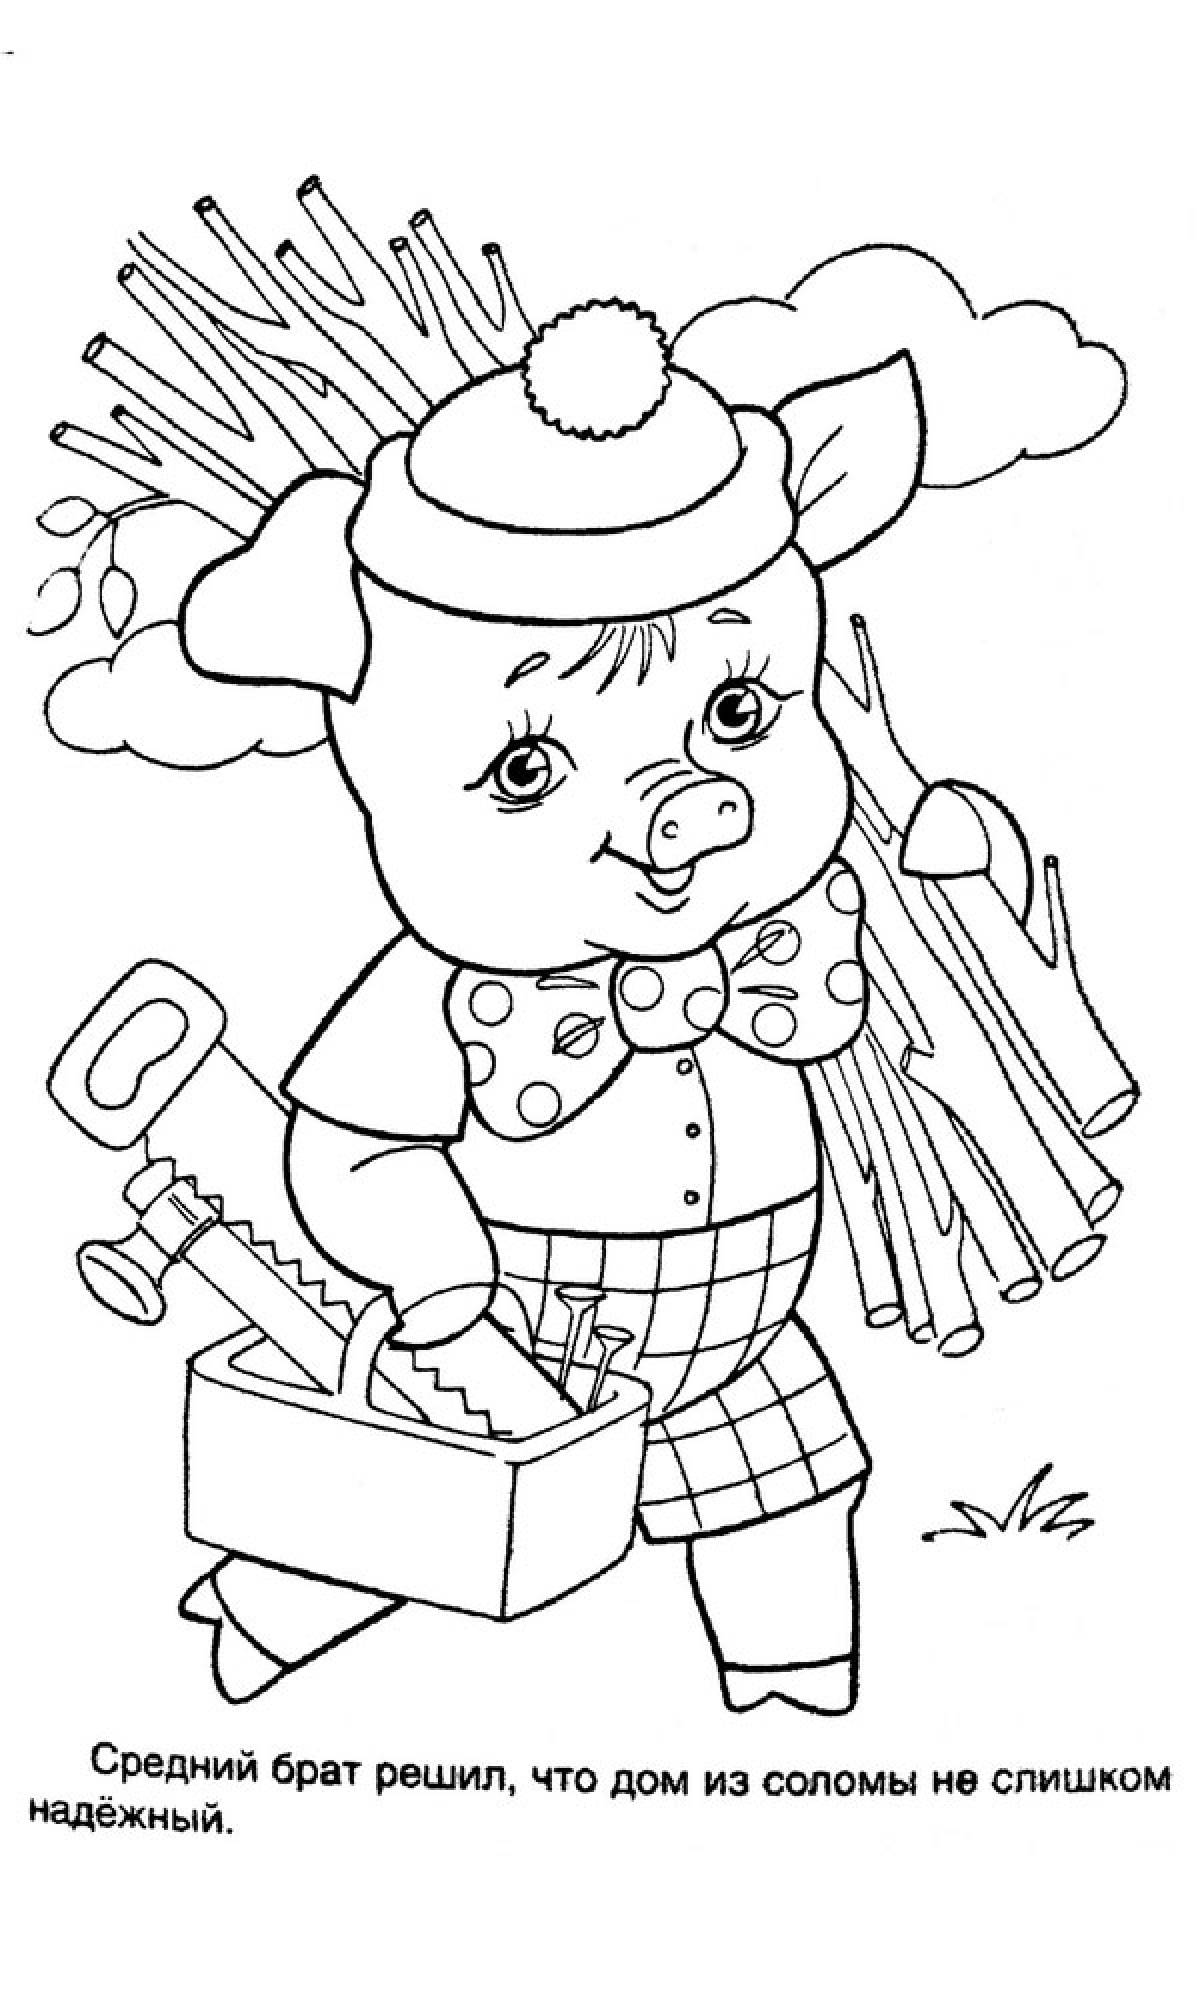 Piglet with tools